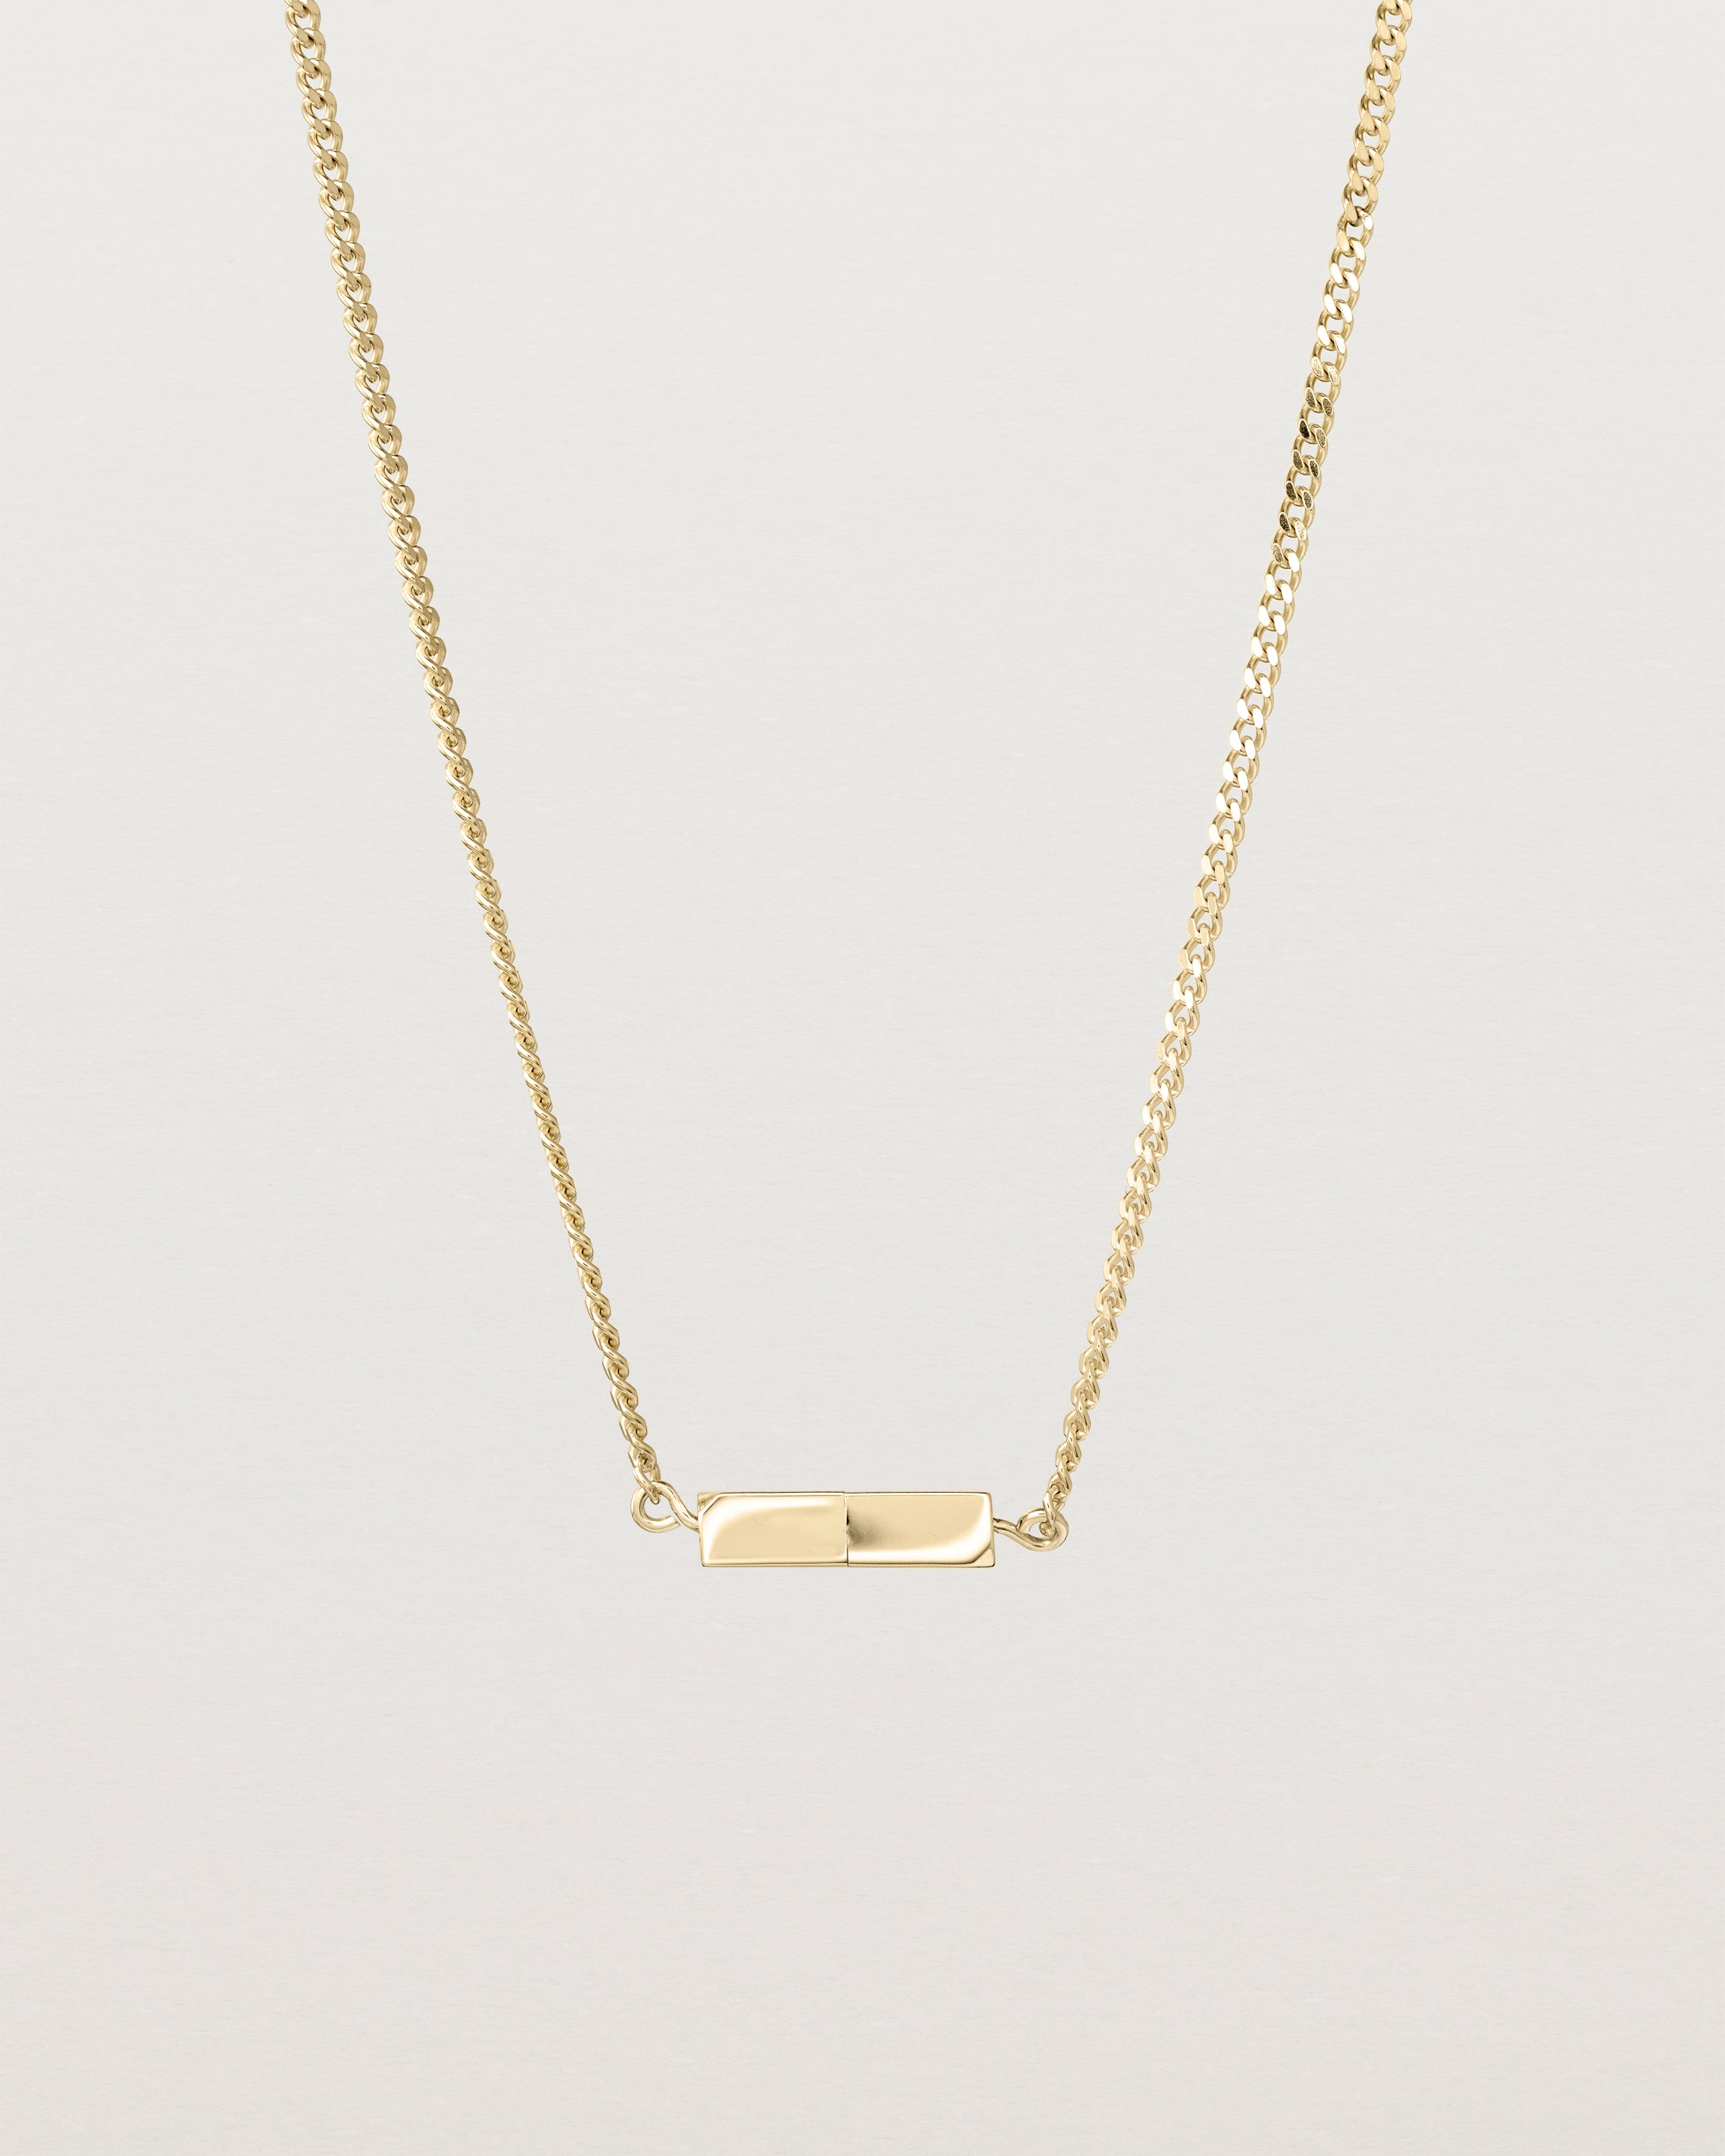 Front view of the Guardian Chain in yellow gold.